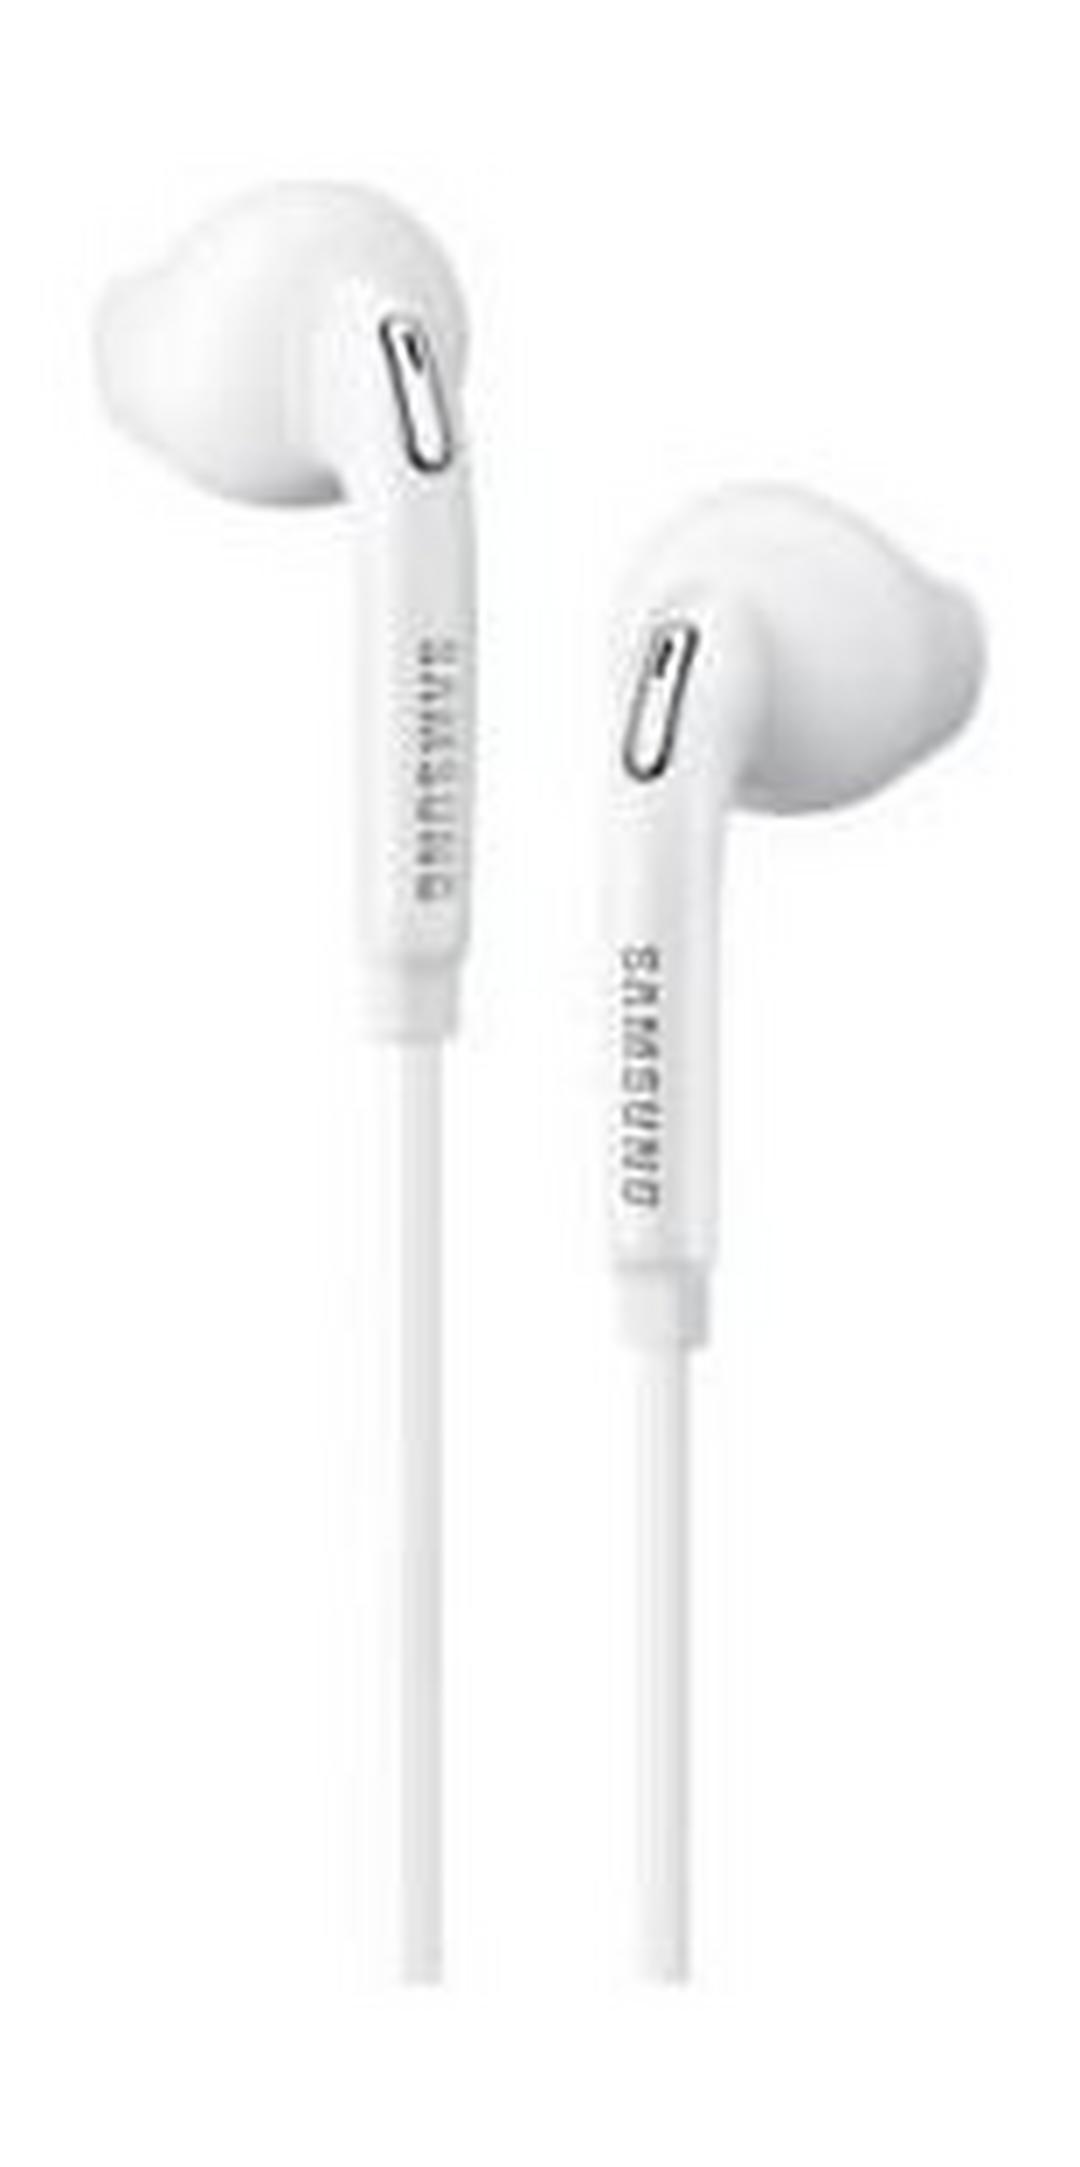 Samsung Hybrid Wired Earphones With Mic (HS920) - White